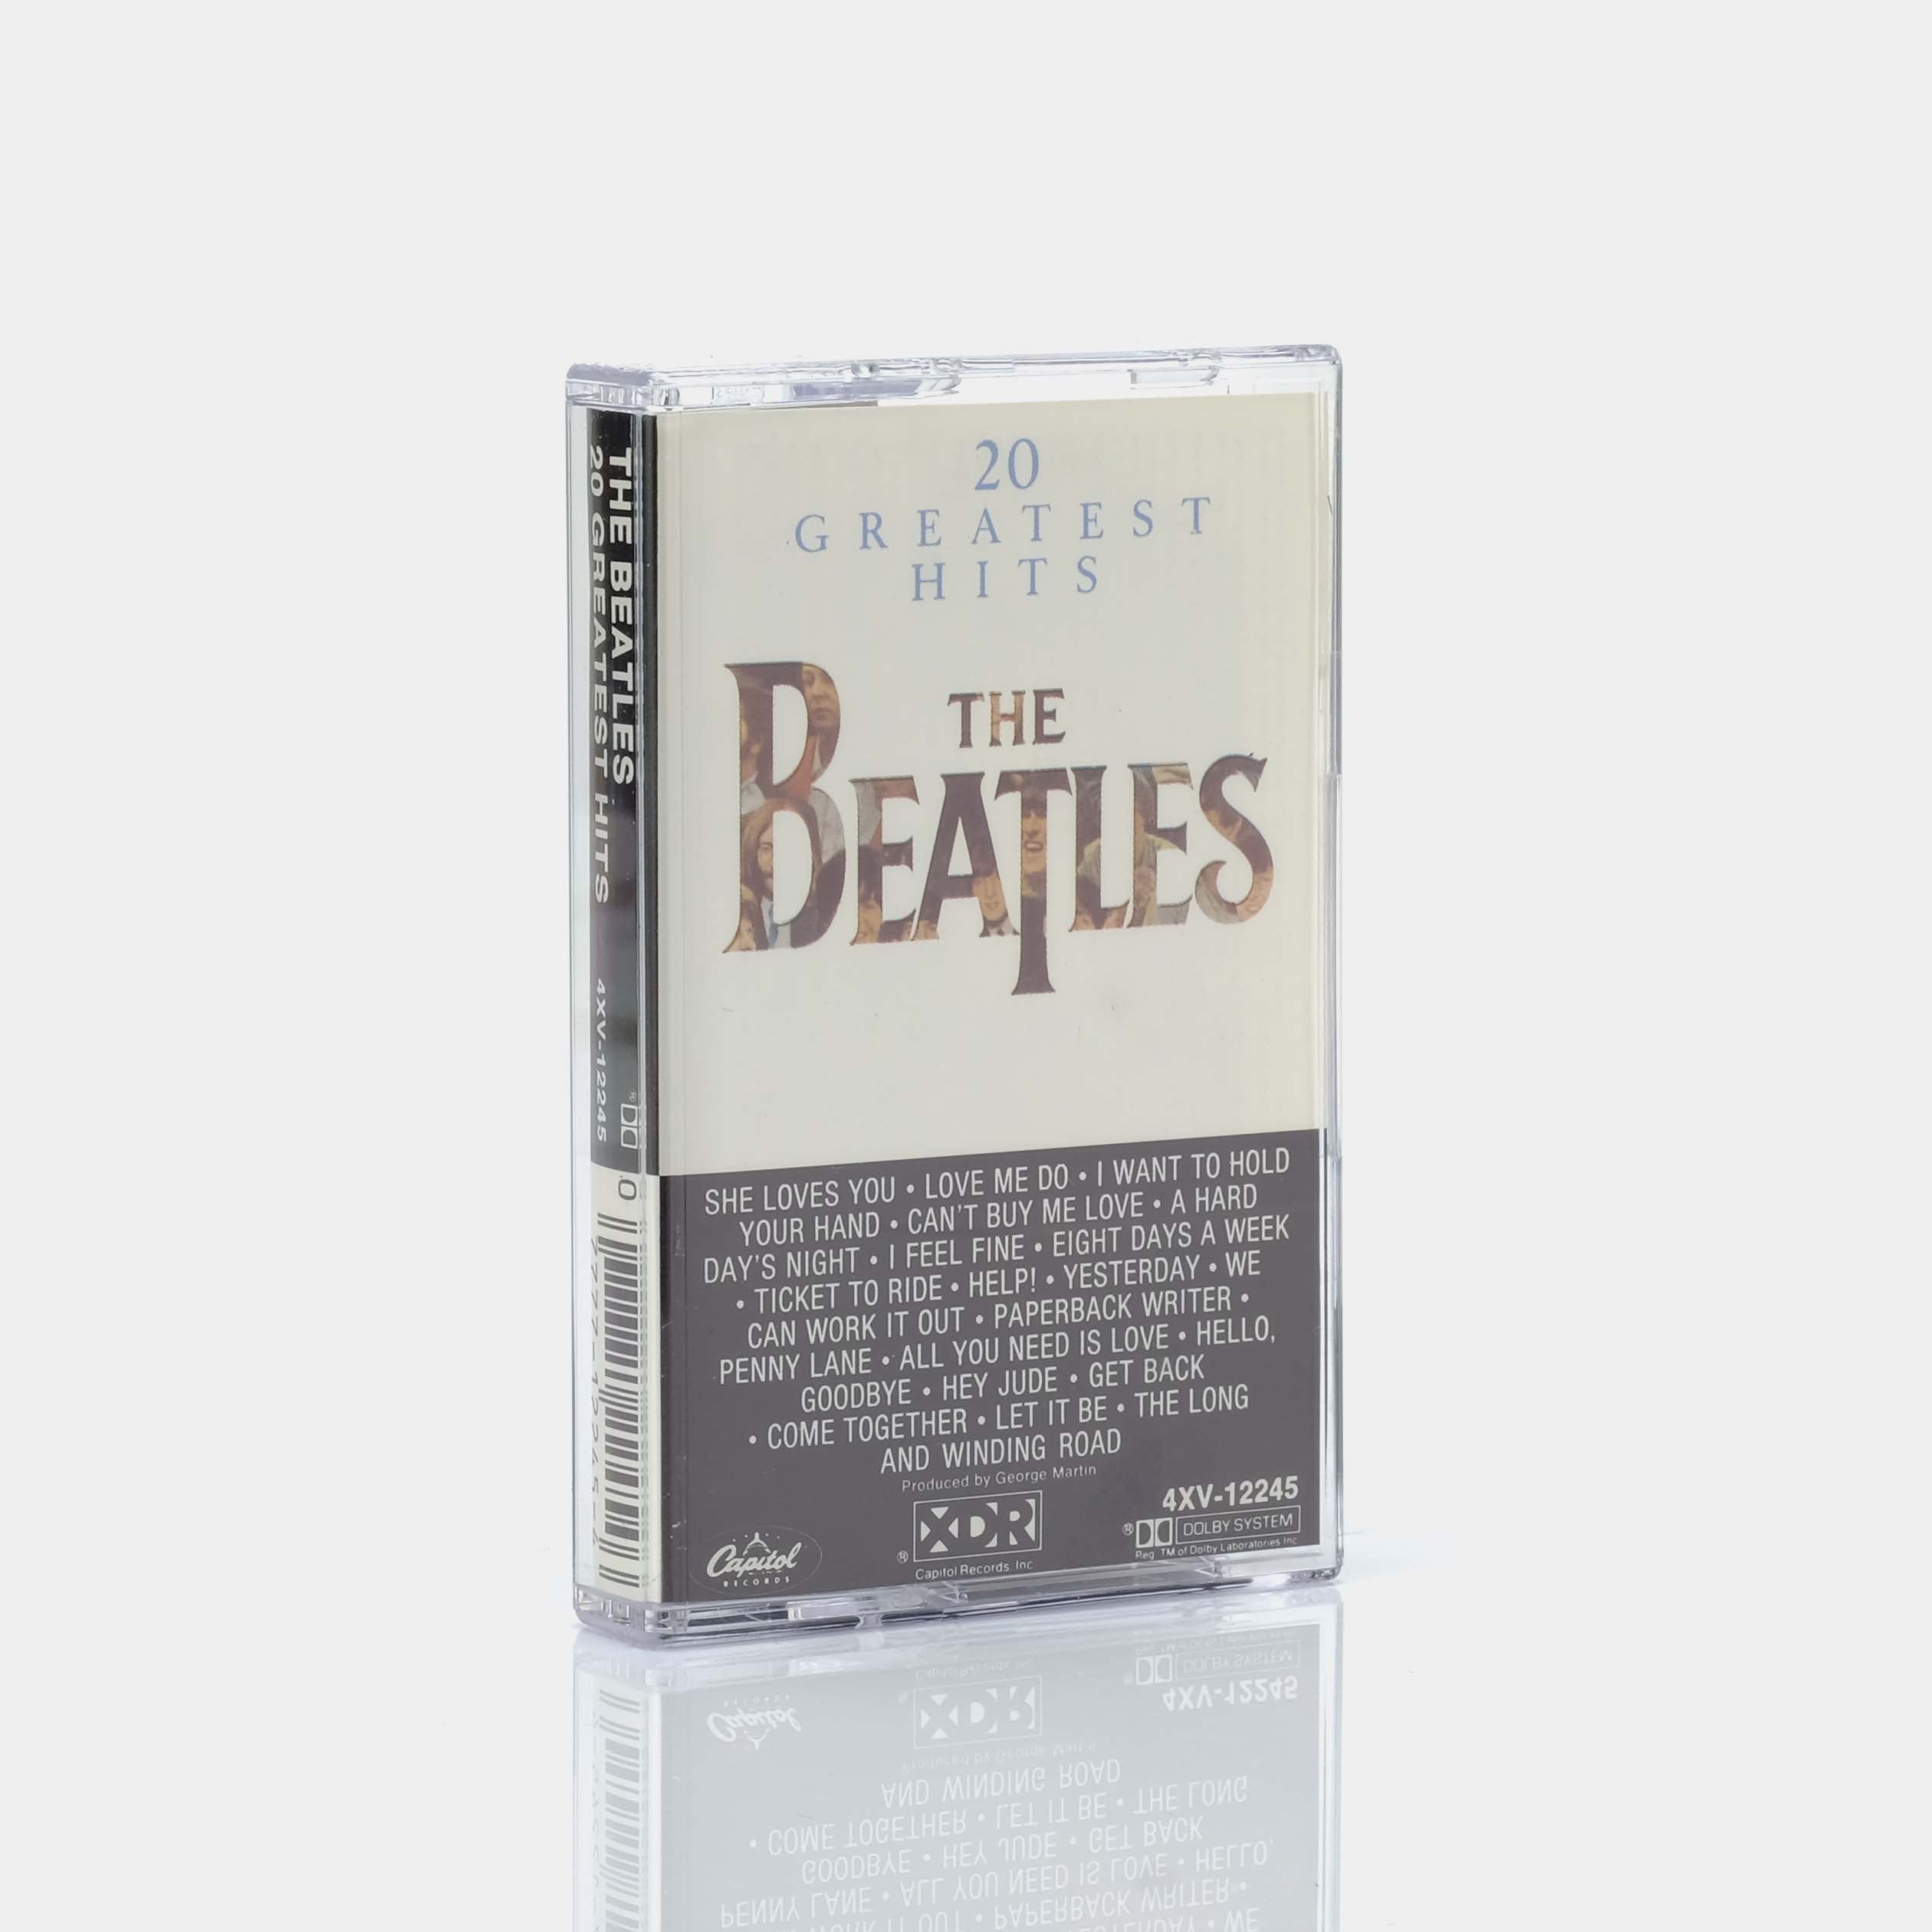 The Beatles - 20 Greatest Hits Cassette Tape